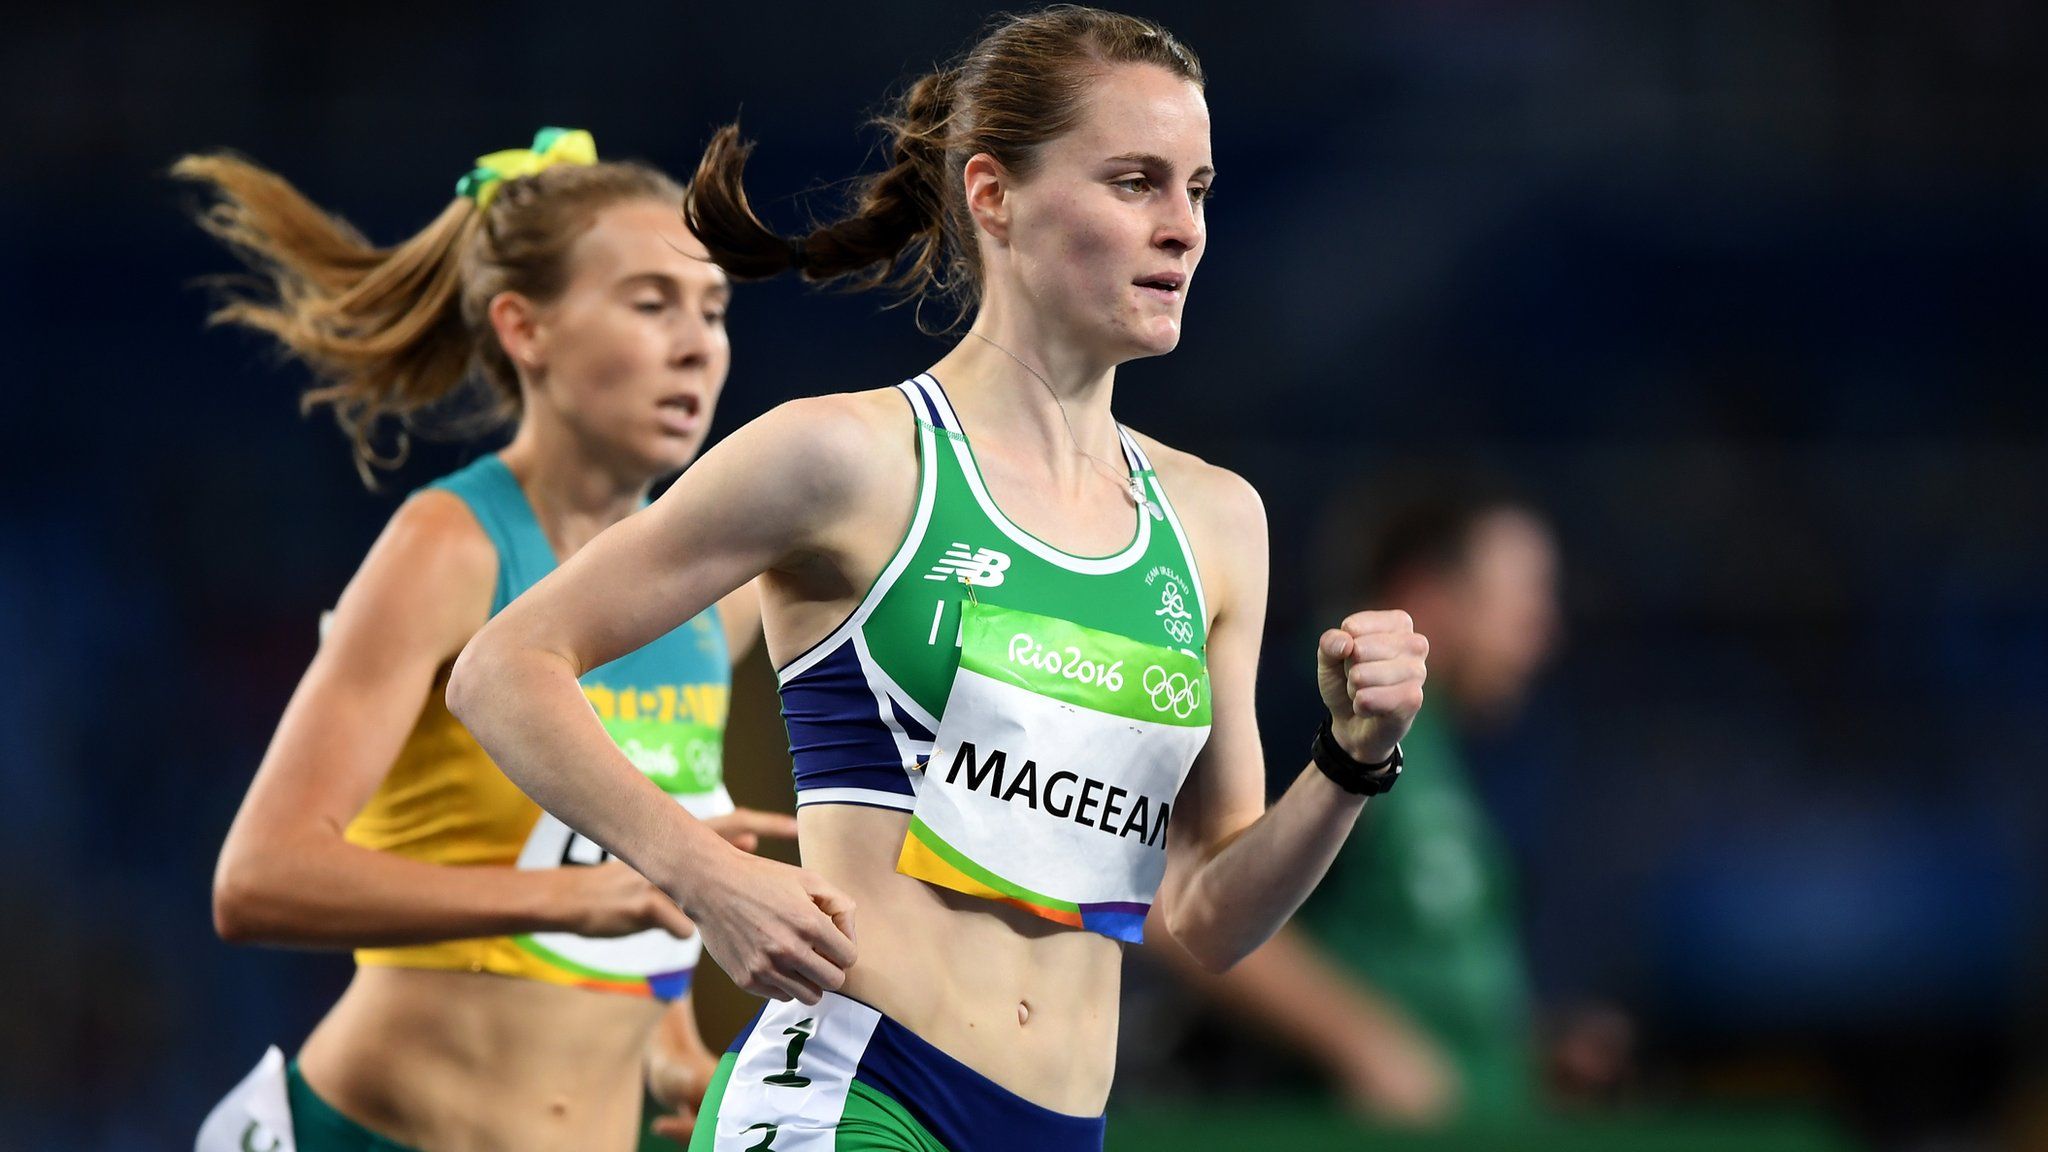 Ireland's Ciara Mageean cruised into the 1,500m semi-finals at Olympic Stadium in Rio the on Sunday